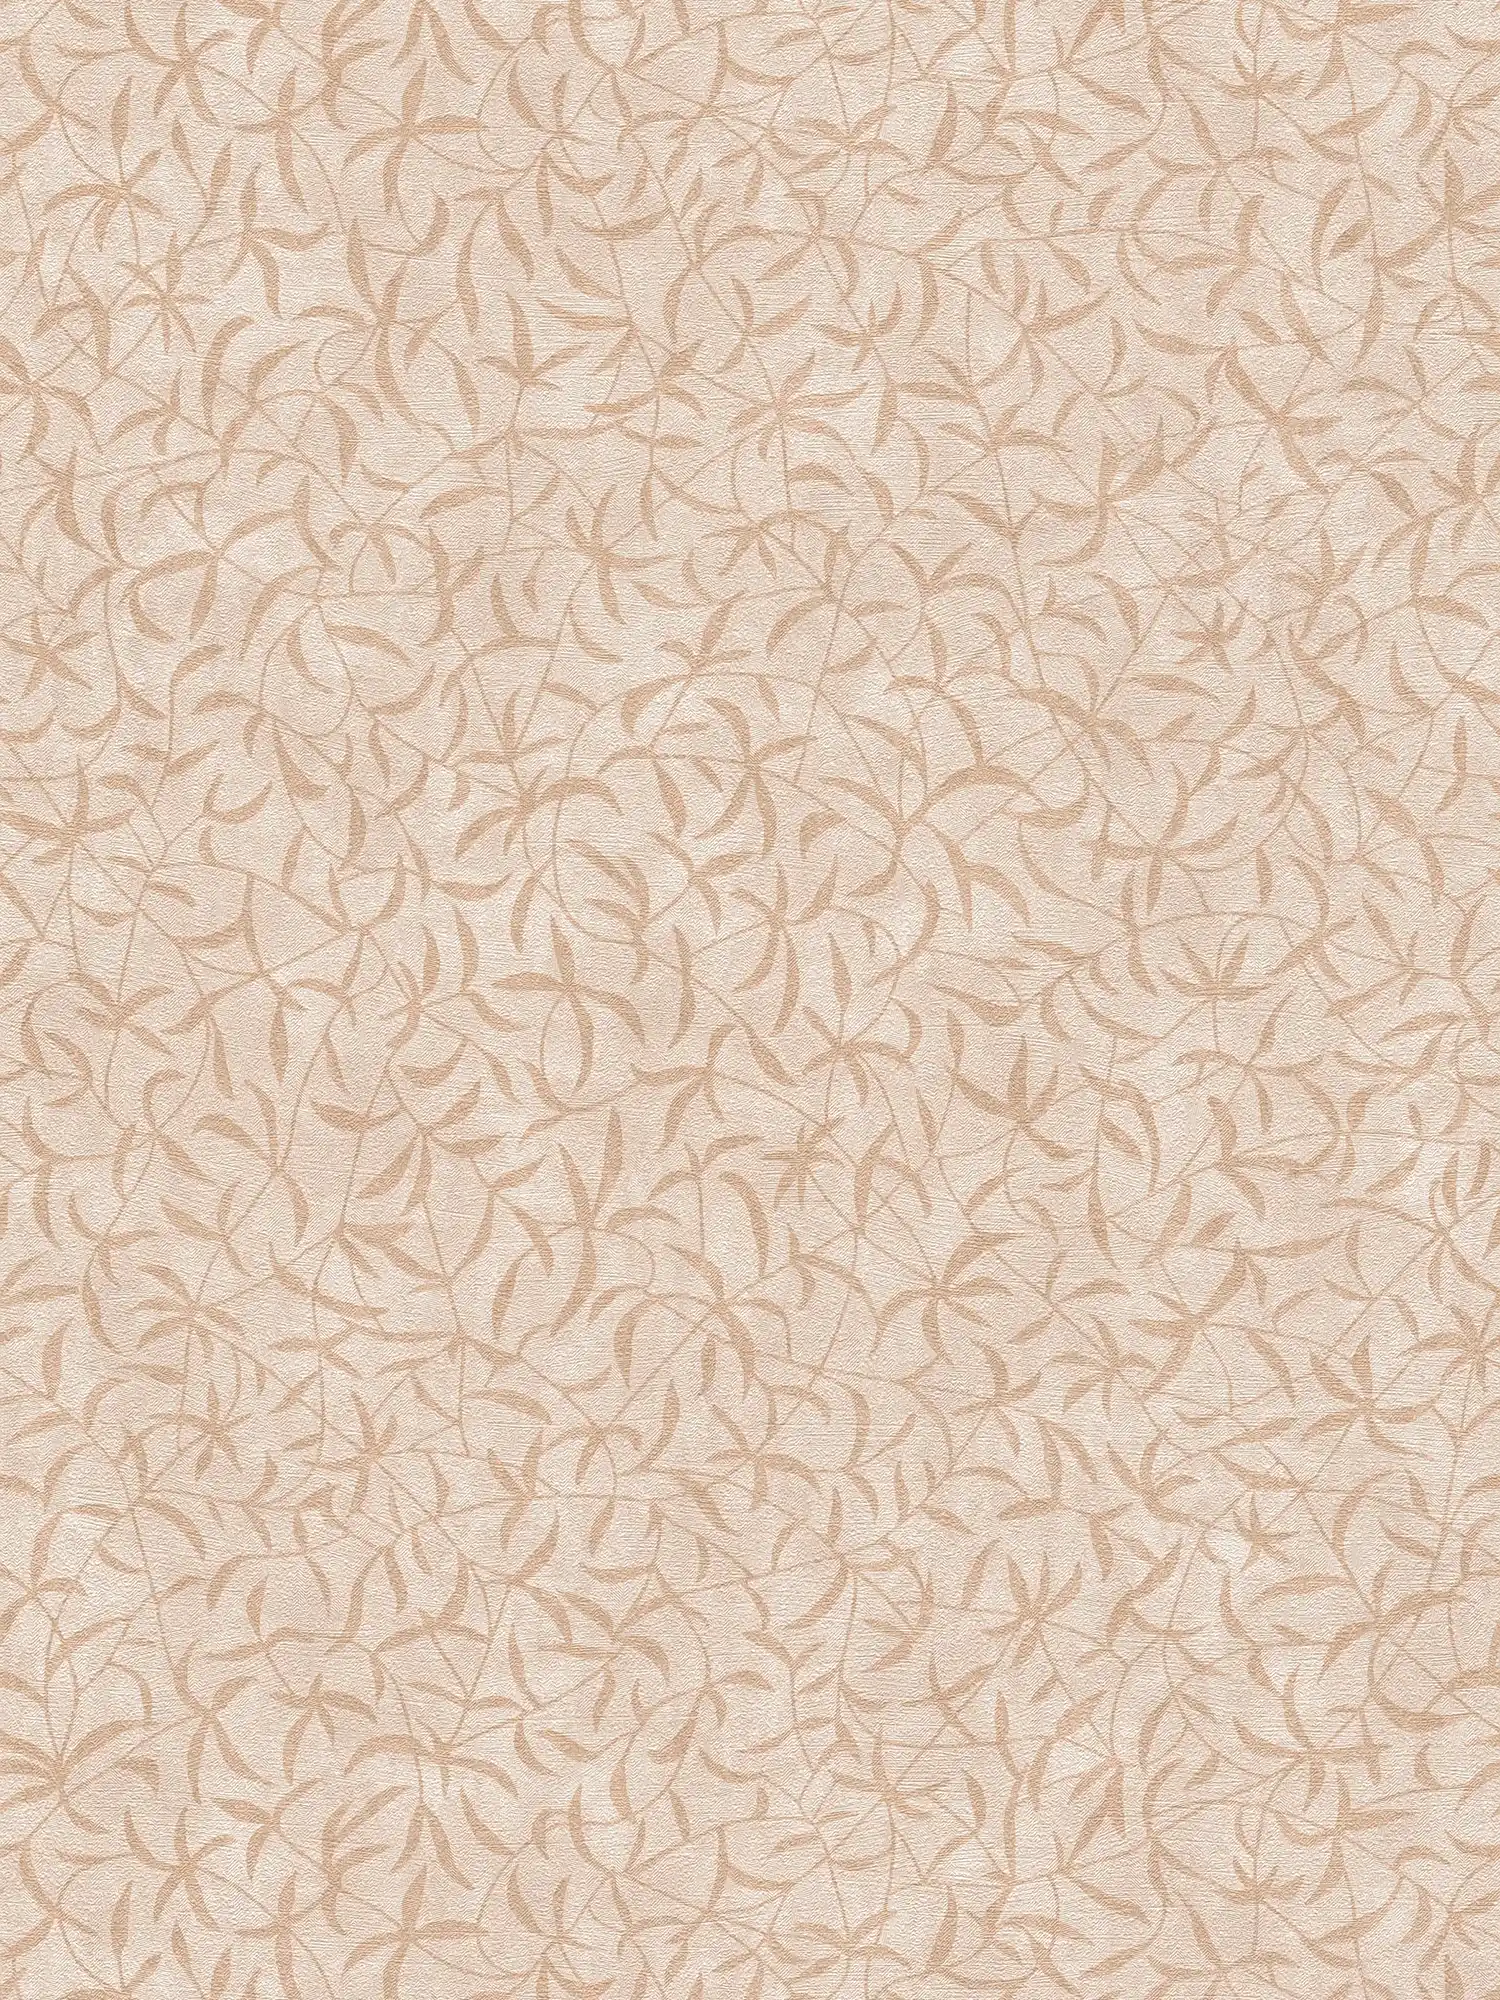 Floral non-woven wallpaper with branches and flowers - cream, beige
